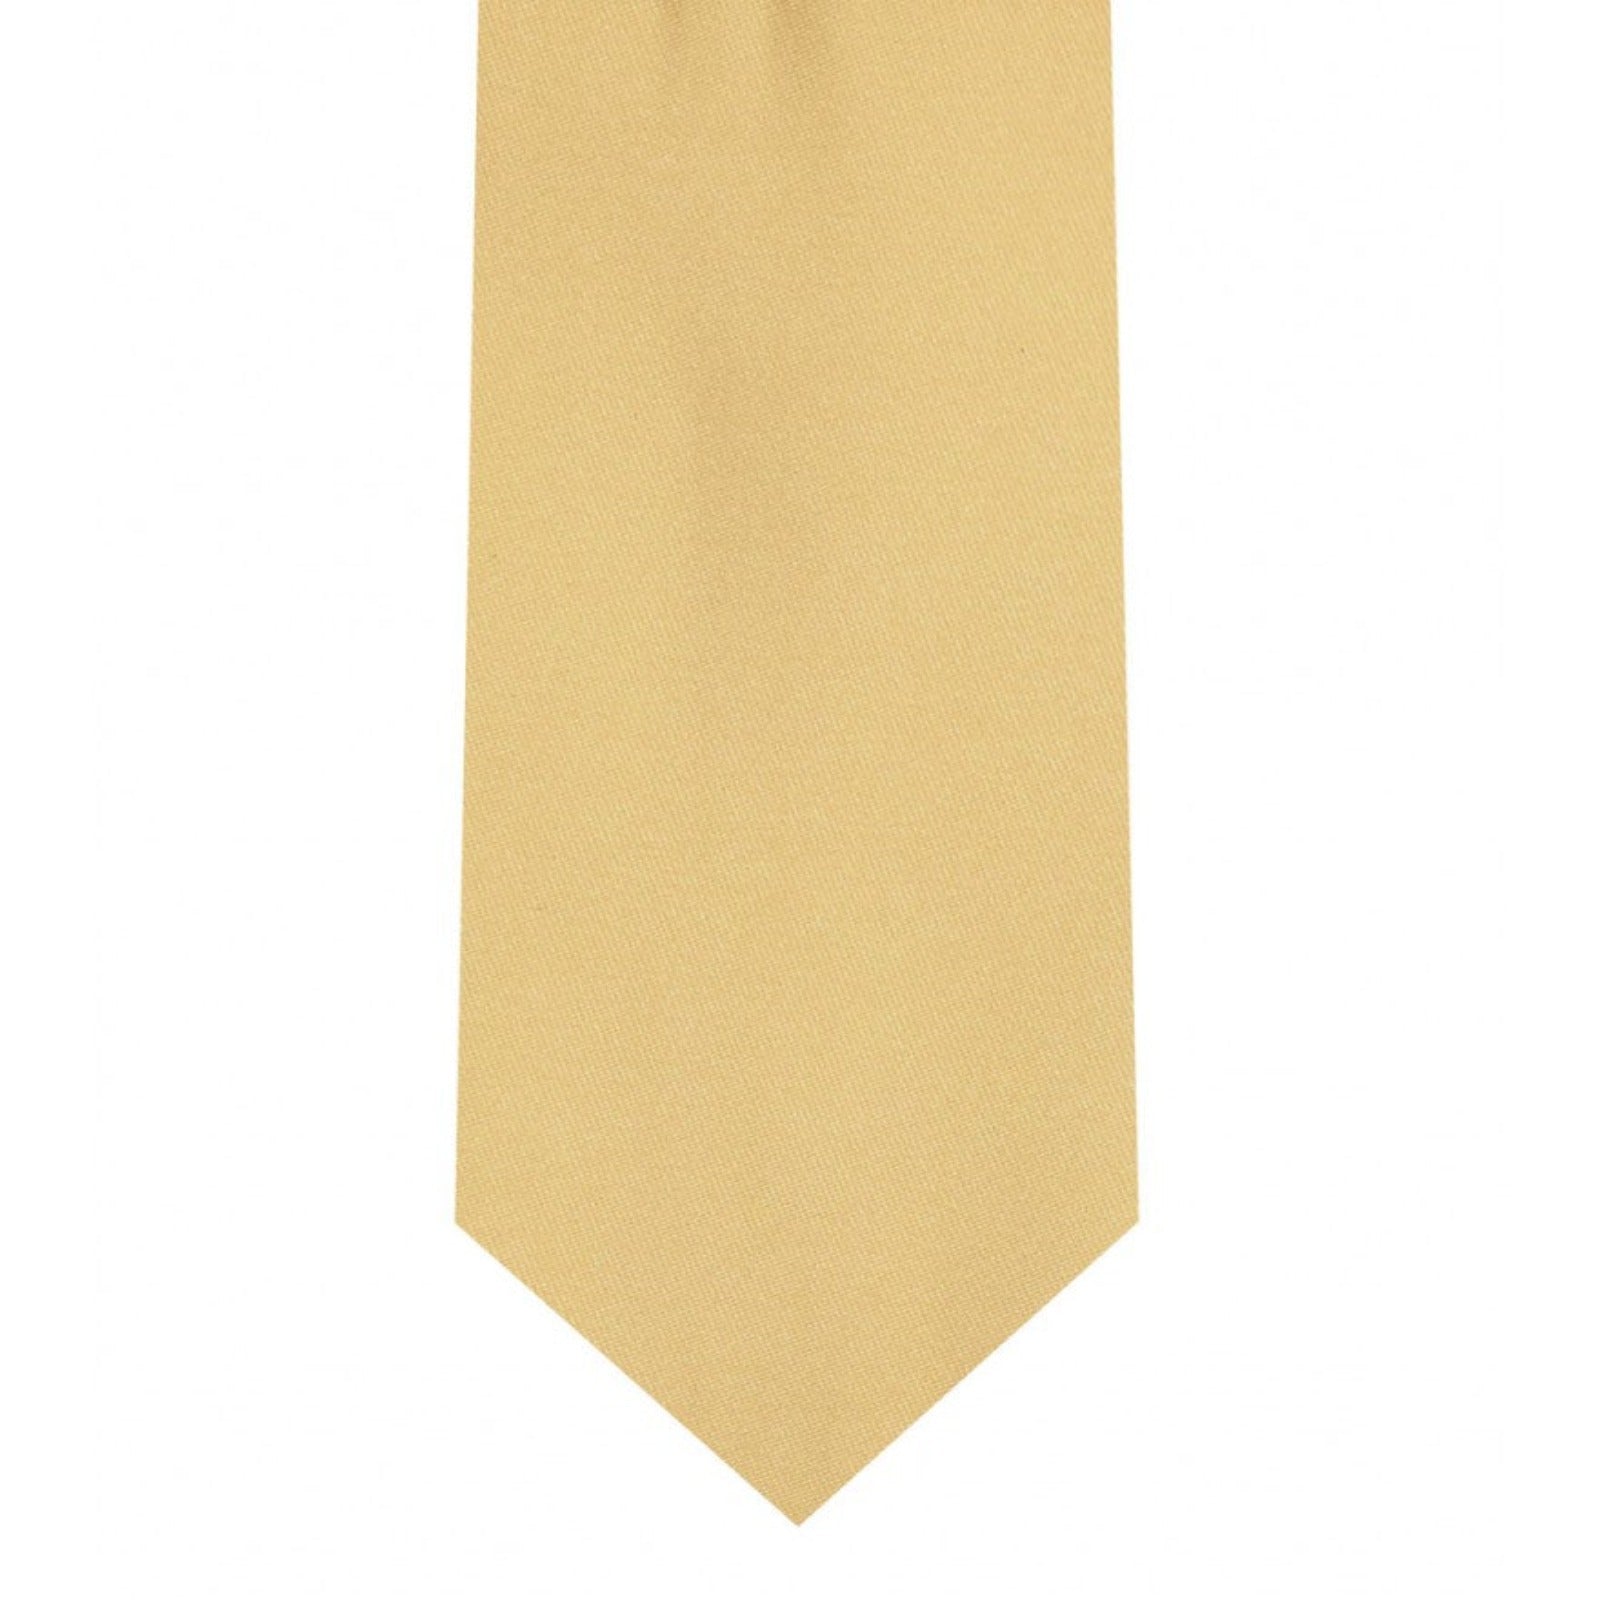 Classic Gold Tie Skinny width 2.75 inches With Matching Pocket Square | KCT Menswear